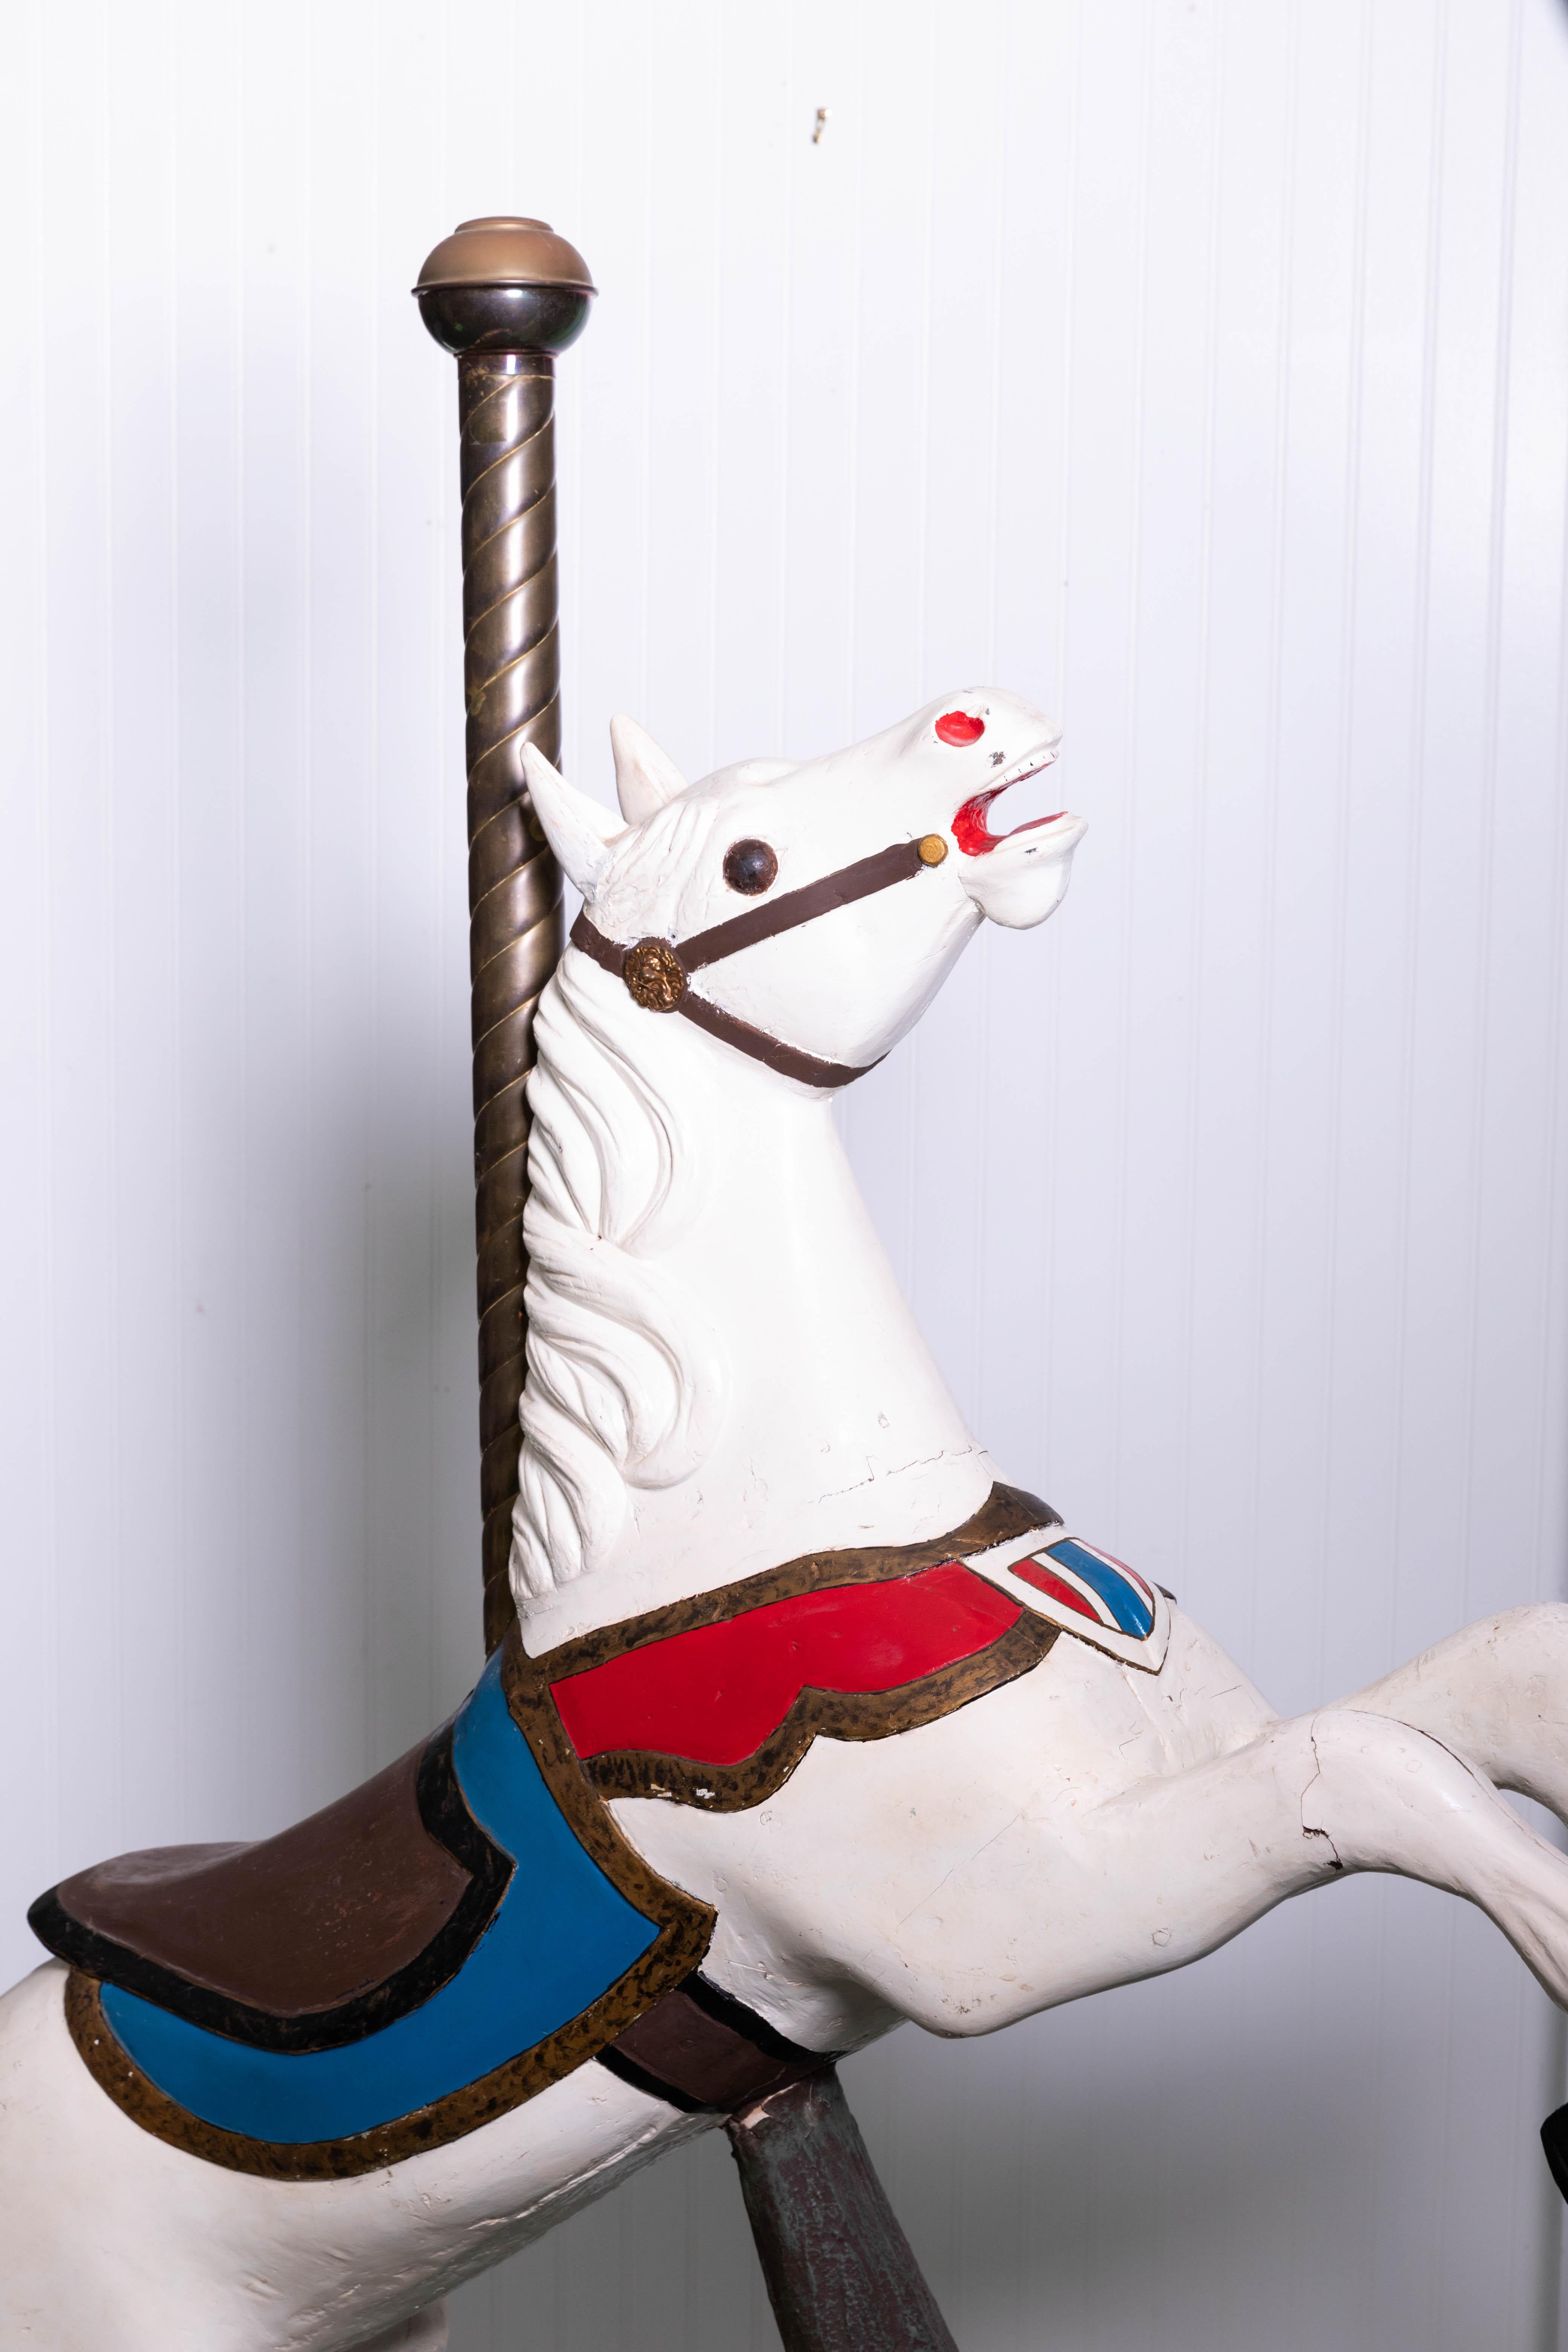 Wooden carousel horse in fixed position. Original gresso over wooden base resembling tree trunk. Horse has been repained while brass pole is an early addition with ears that were replaced.